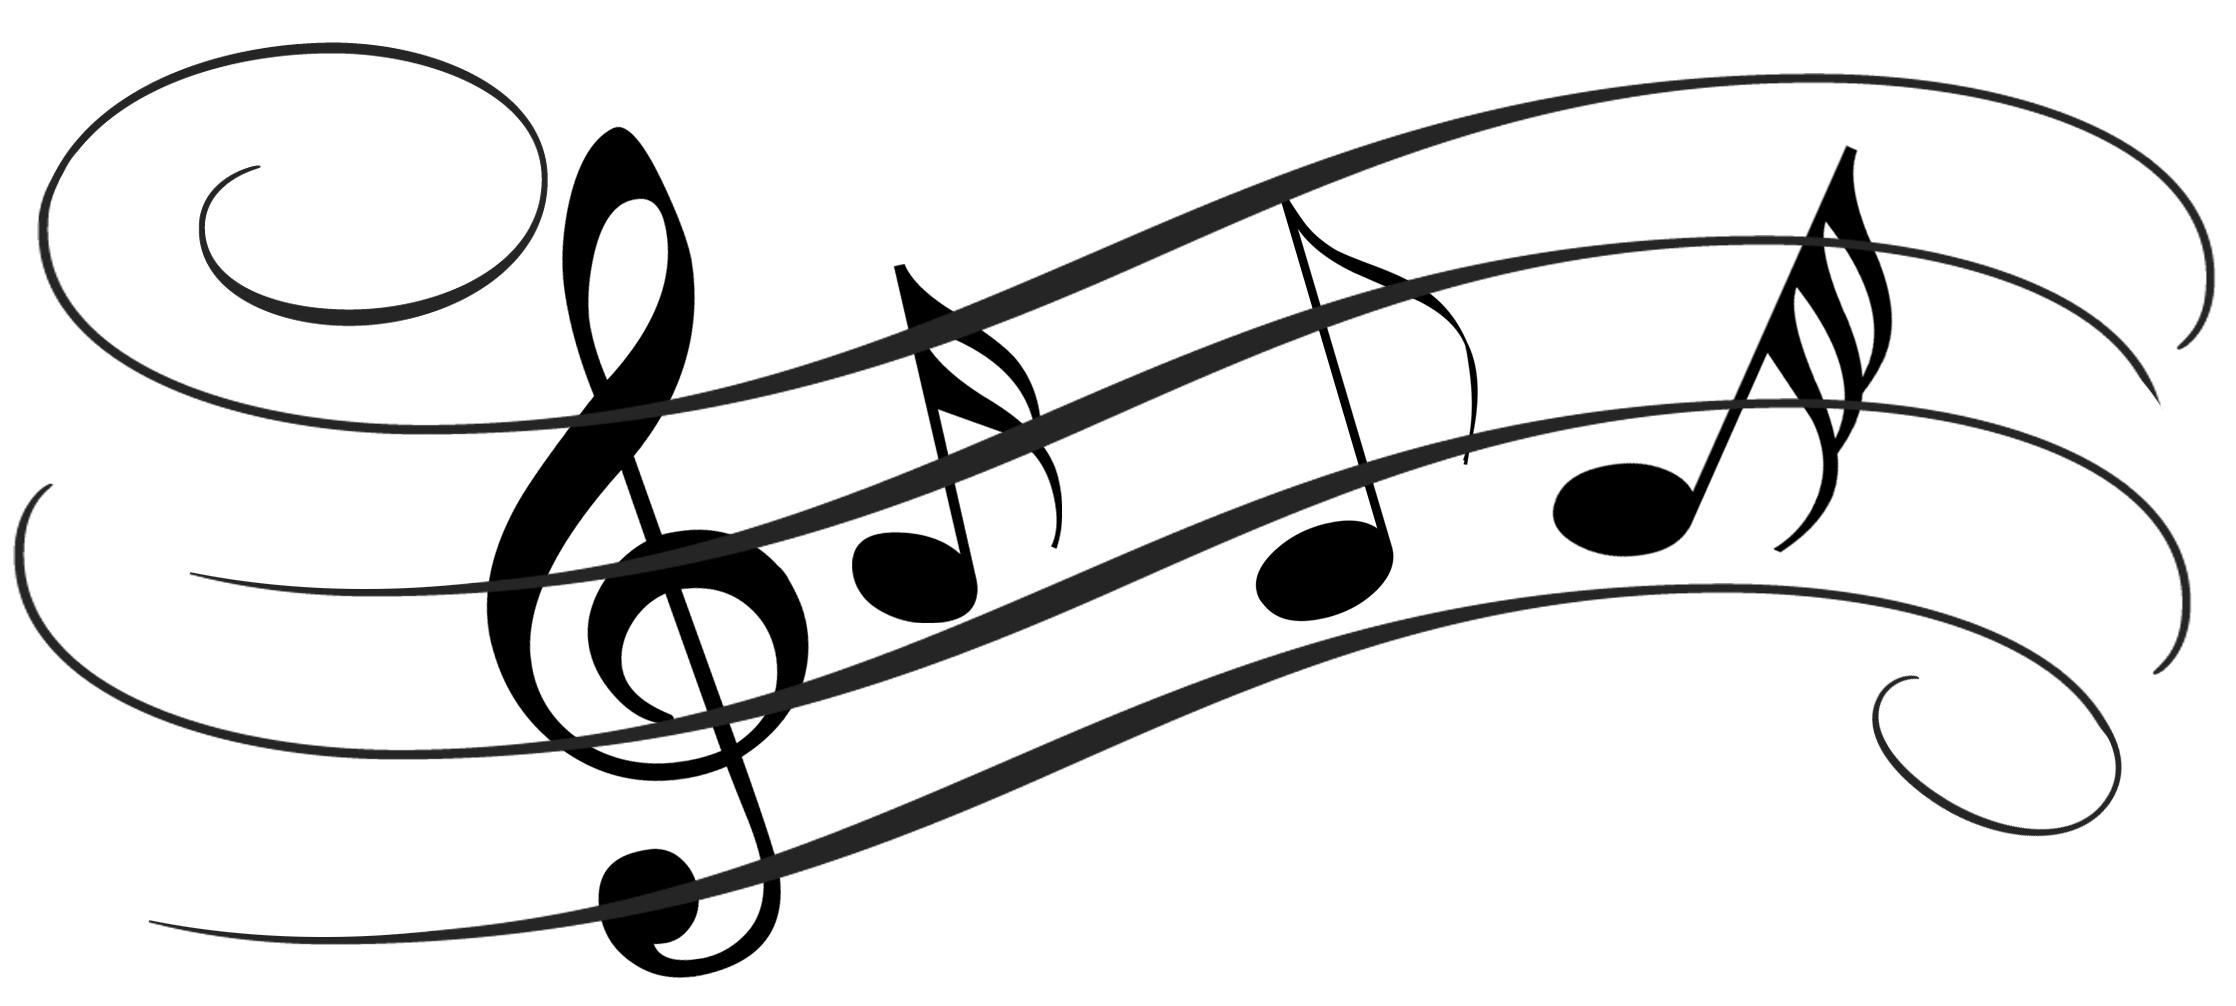 music notes on staff clipart dT6XGz8T9